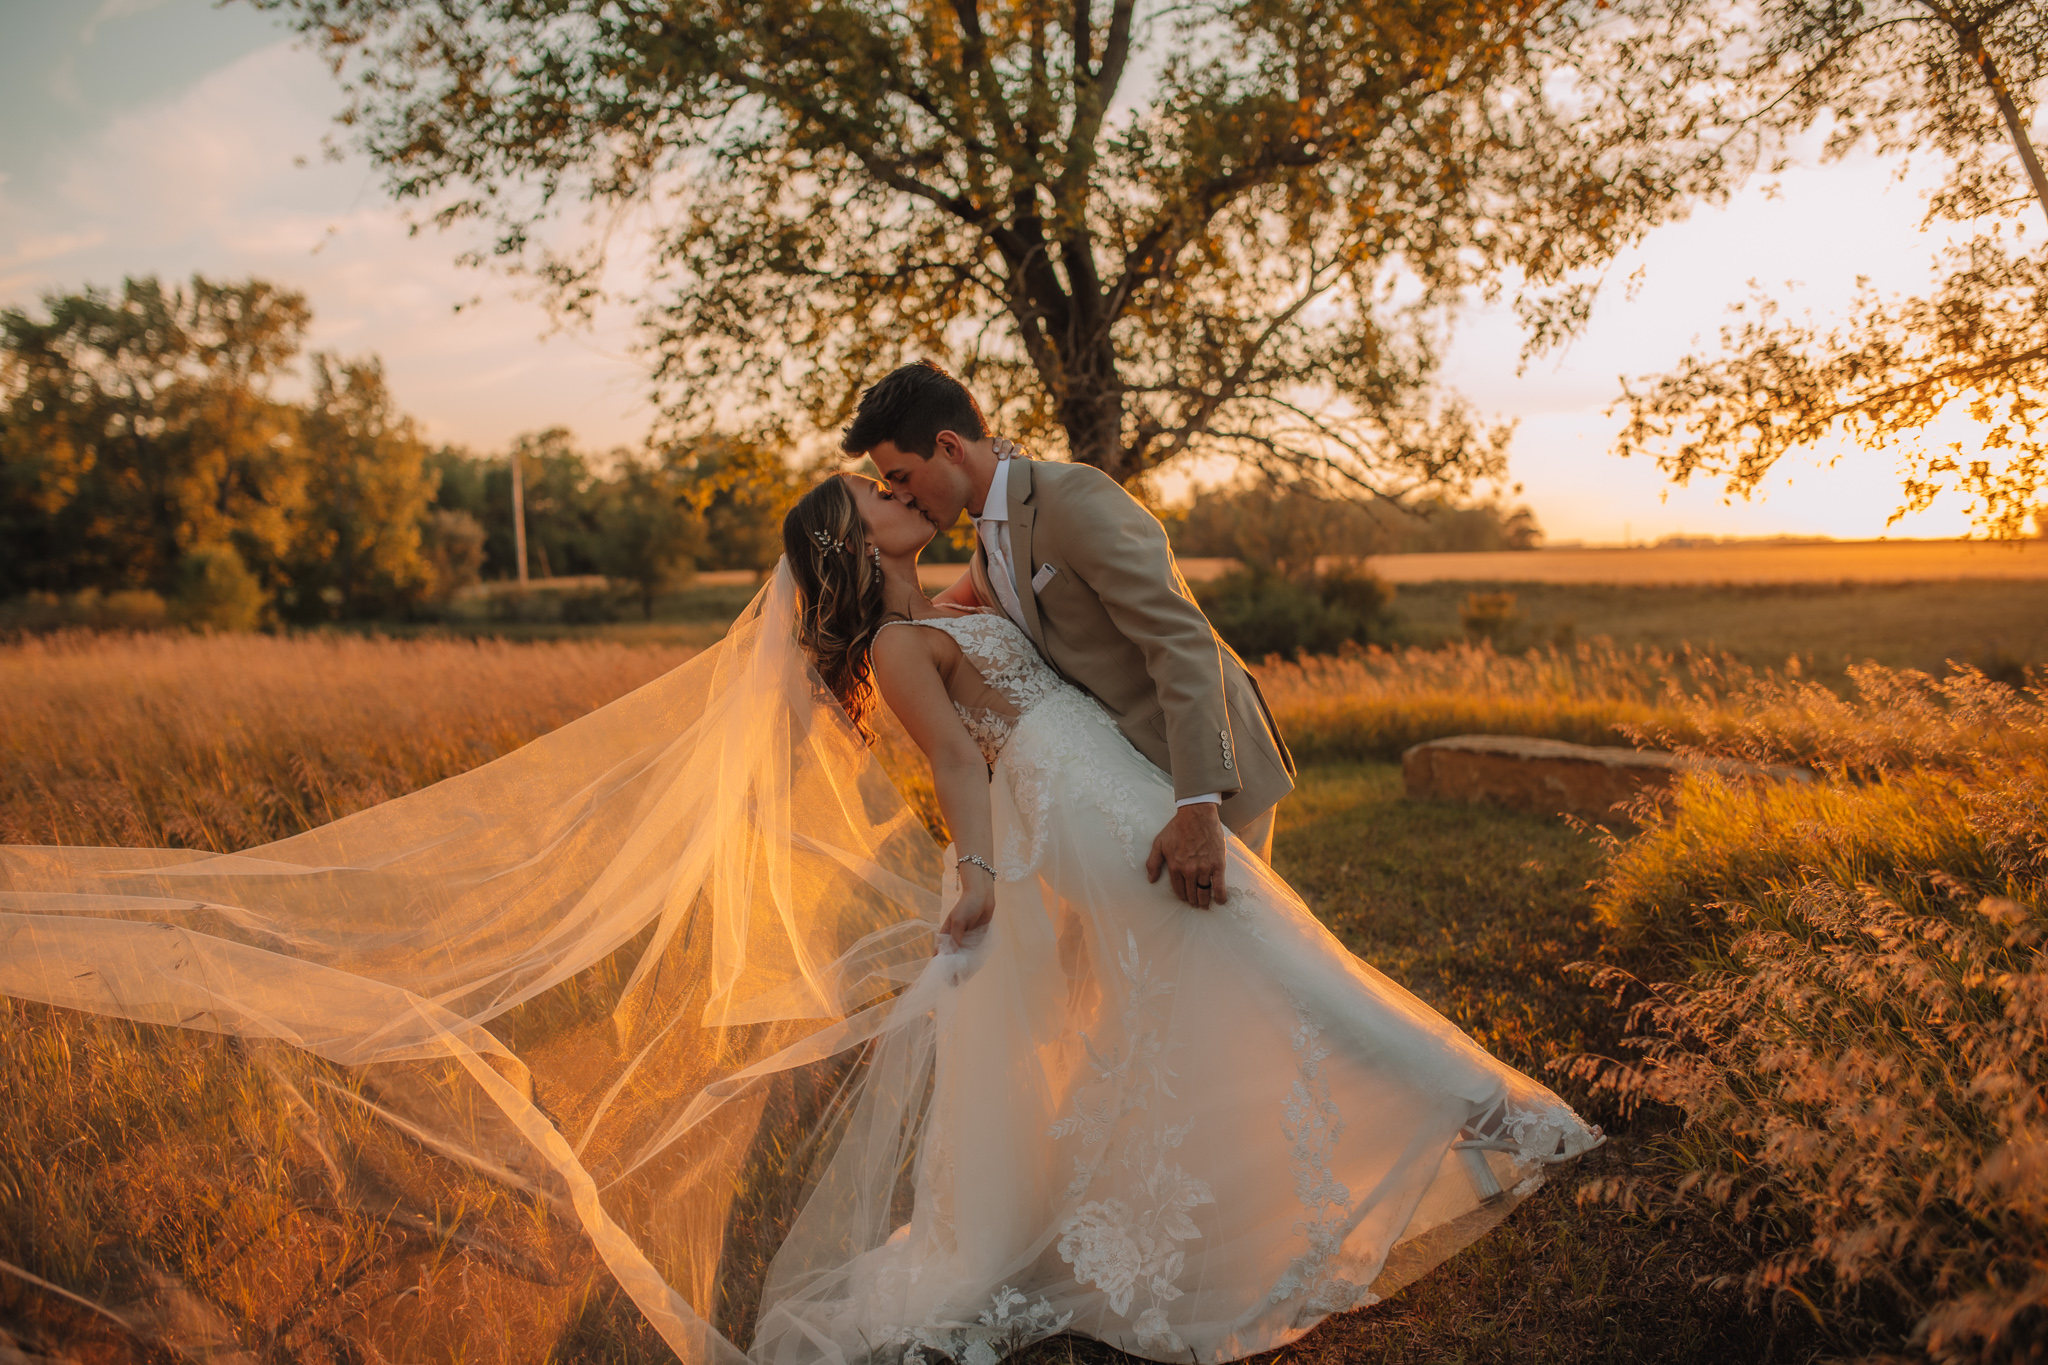 Sunset portrait of Bride and Groom kissing with her veil blowing in the wind